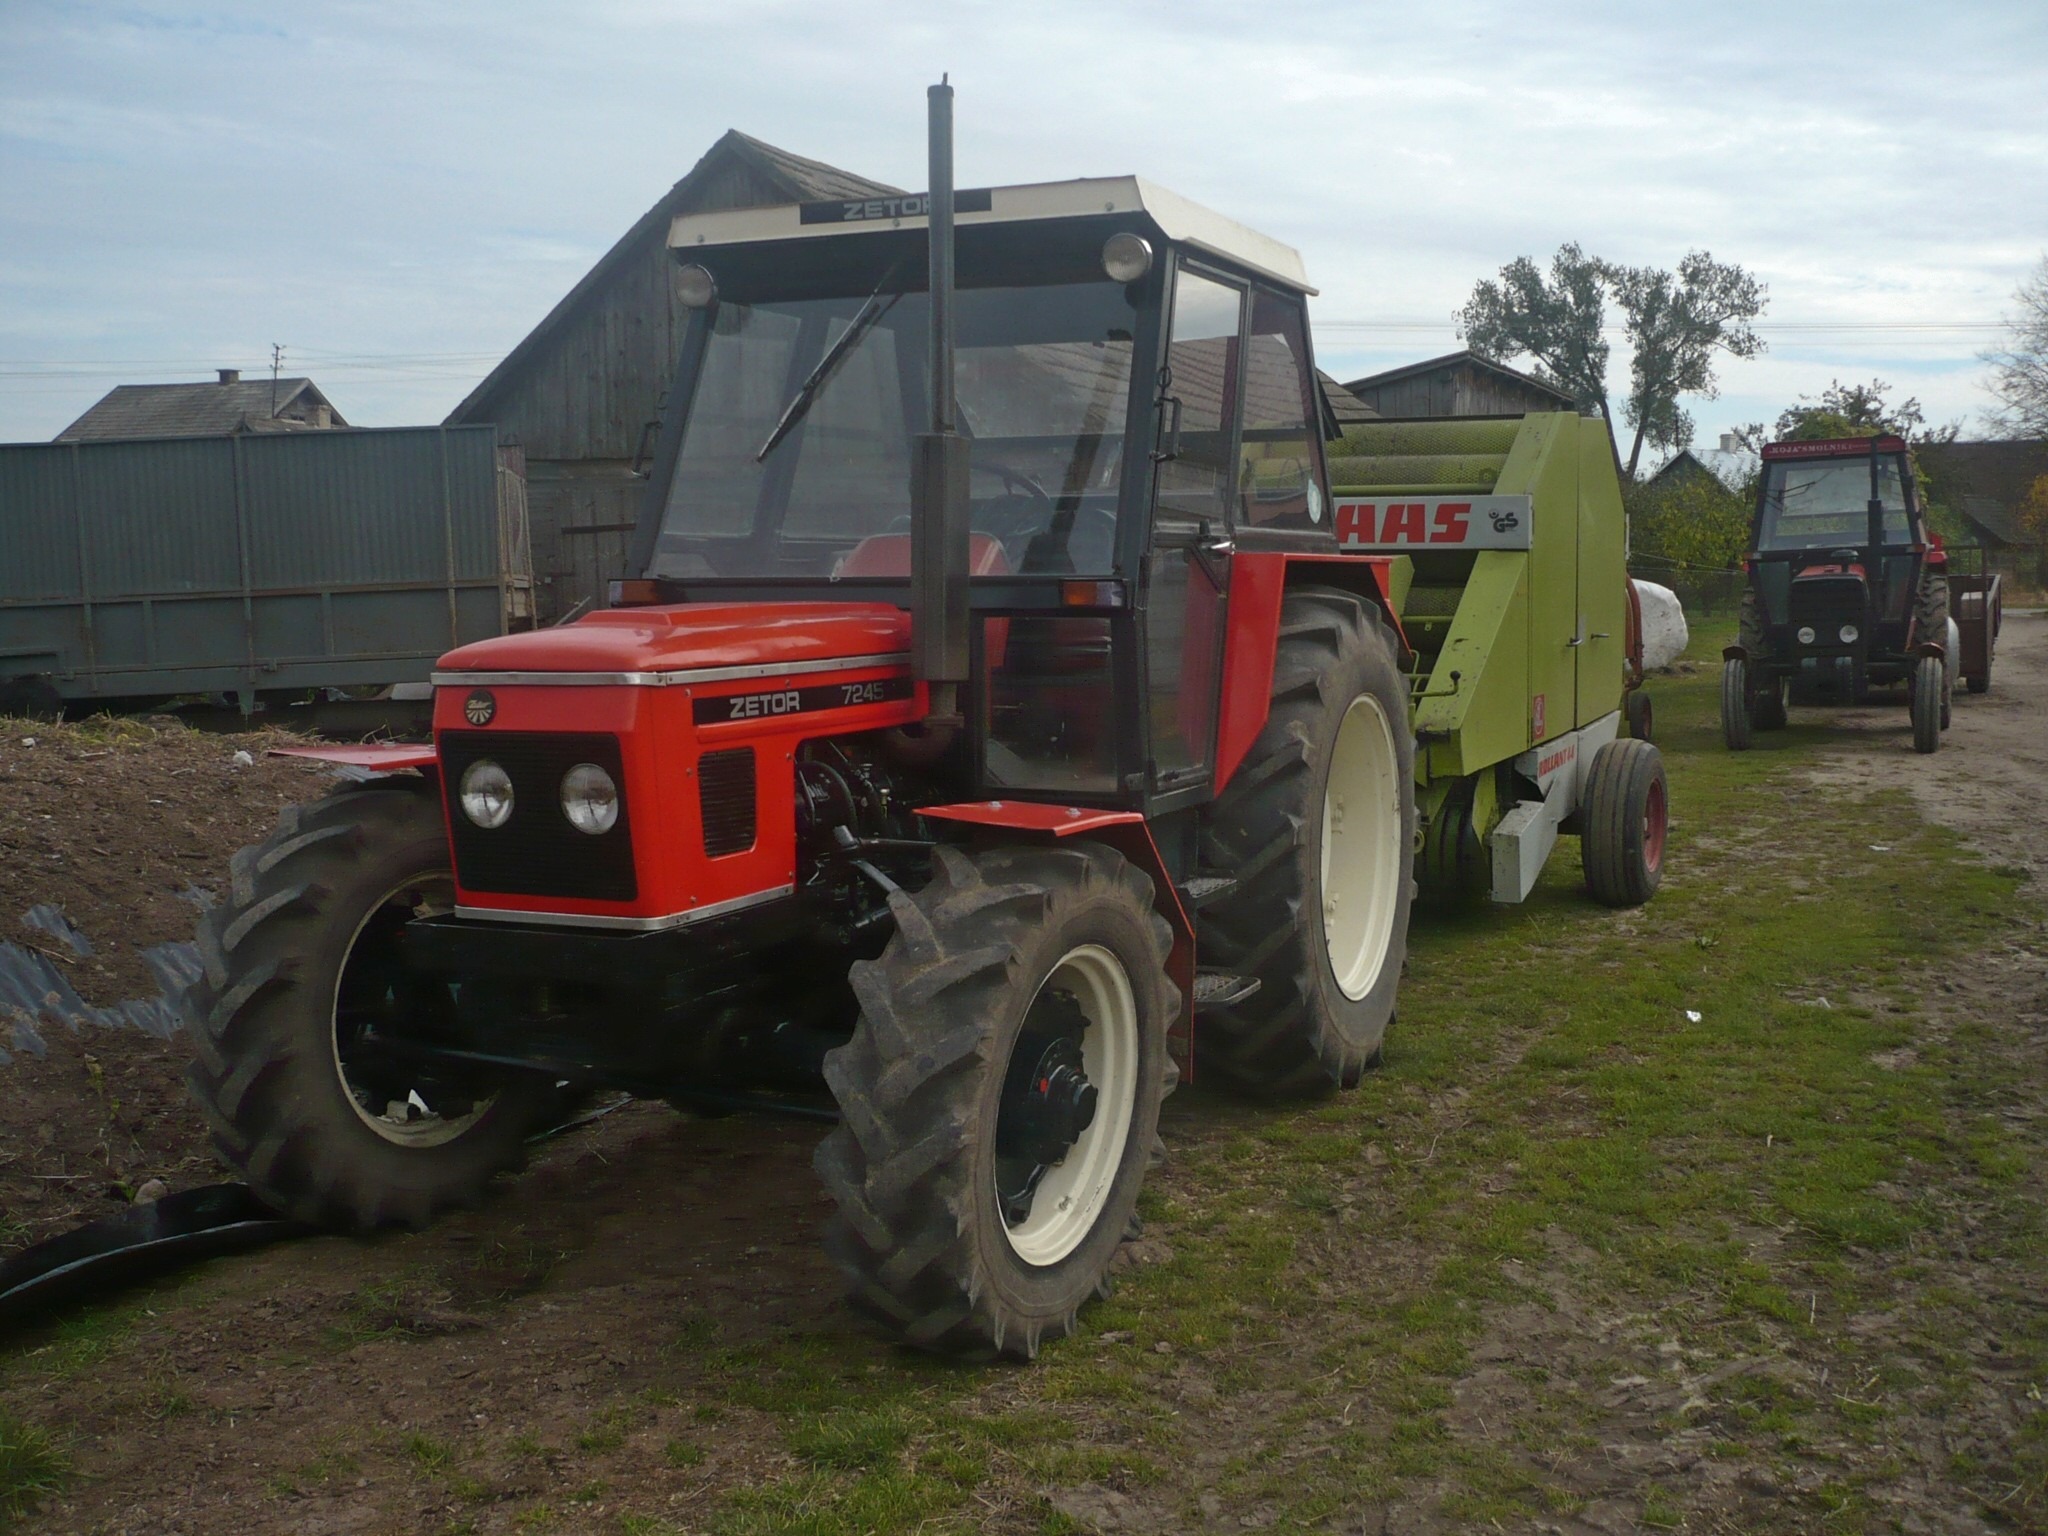 zetor 7045 - group picture, image by tag - keywordpictures.com